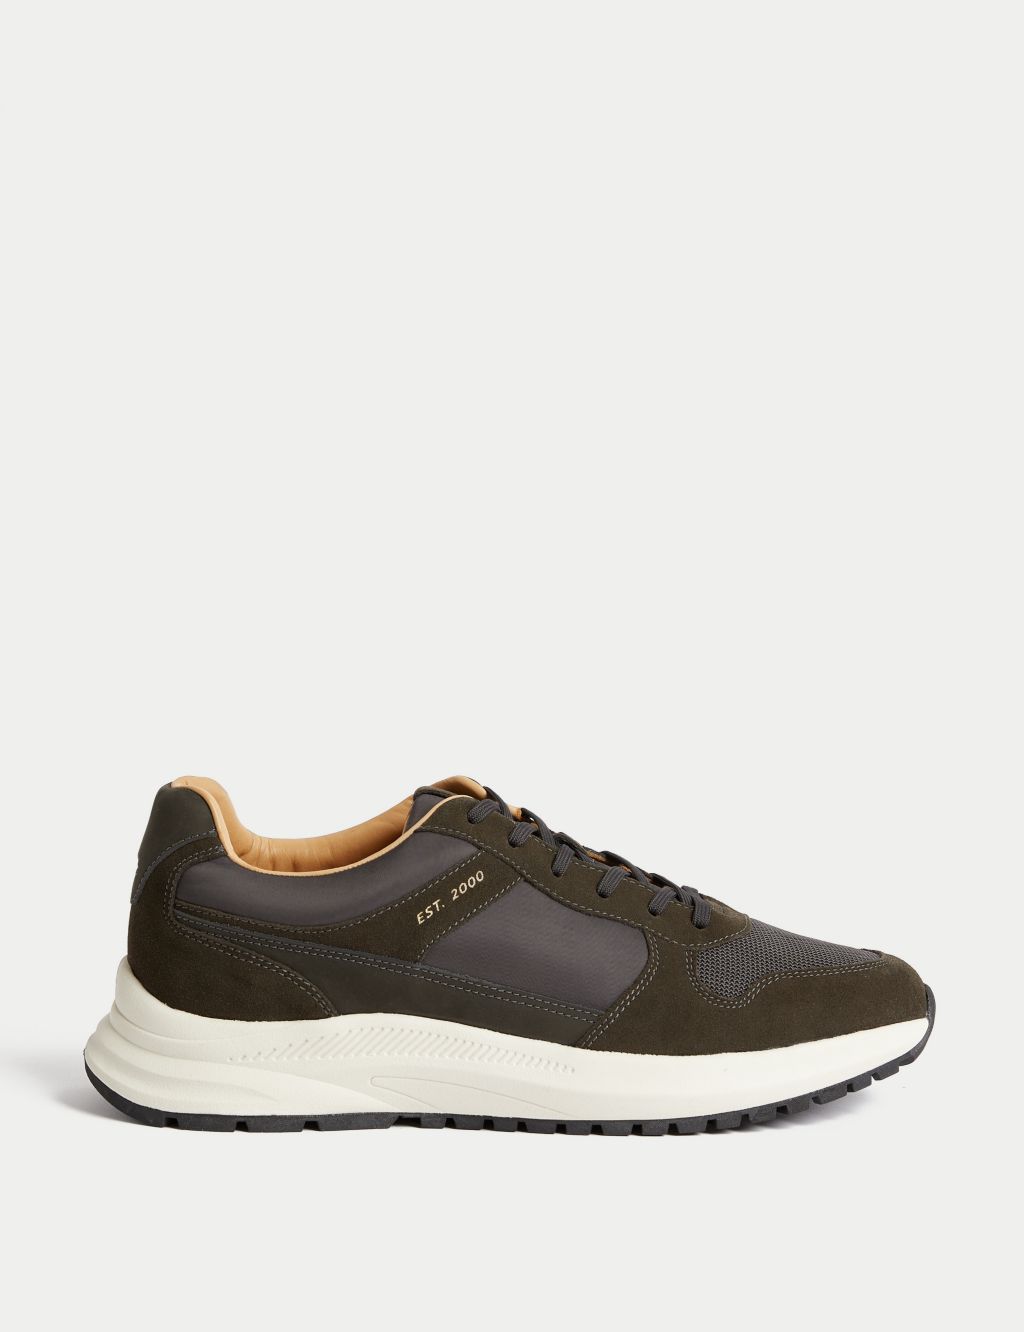 Men’s Leather Trainers | M&S